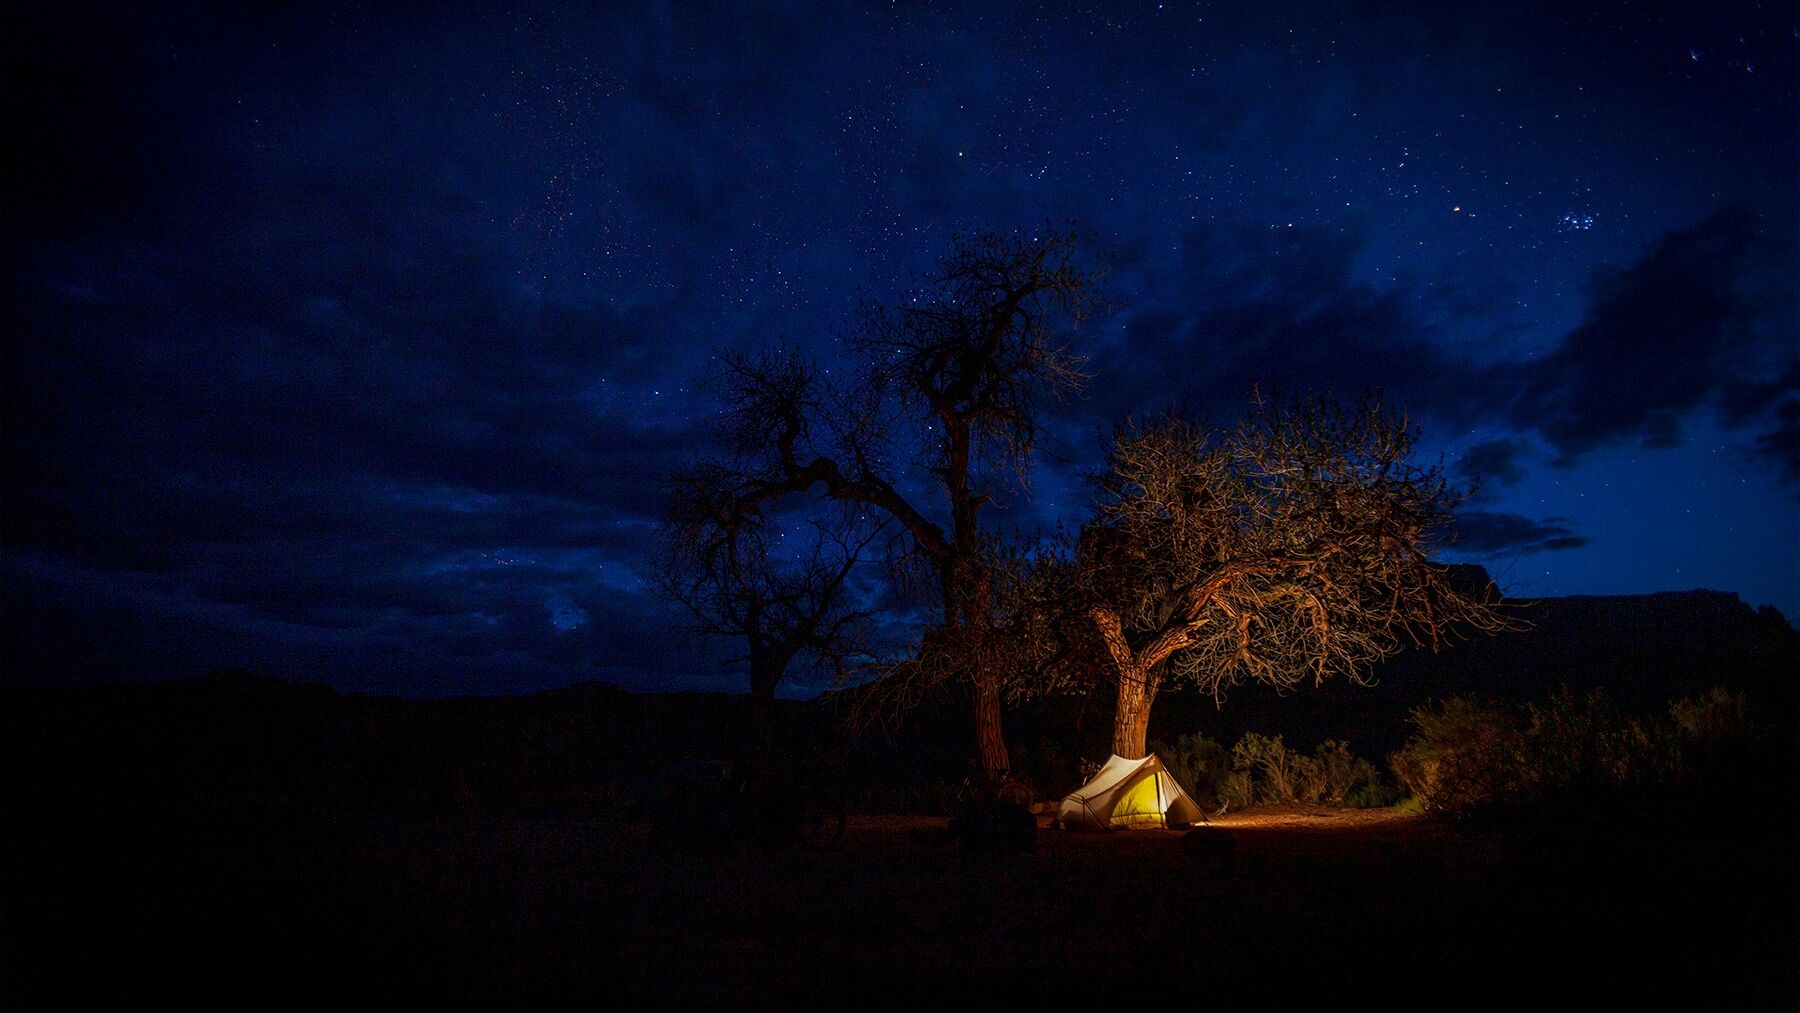 Landscape-oriented color photograph. A dark night sky glows a vivid blue in the upper two-thirds of the image with dark clouds and tiny dots of stars scattered across the sky. Just off center to the right a single tent glows yellow from a lamp inside, illuminating the surrounding area with warm orange light in a sea of almost complete darkness. The light shows a large oak tree just behind the tent, half lit, half in shadow, and a small area of desert earth is visible to the right of the tent. The rest of the bottom third of the image is almost completely black. The scene is quiet and calm.